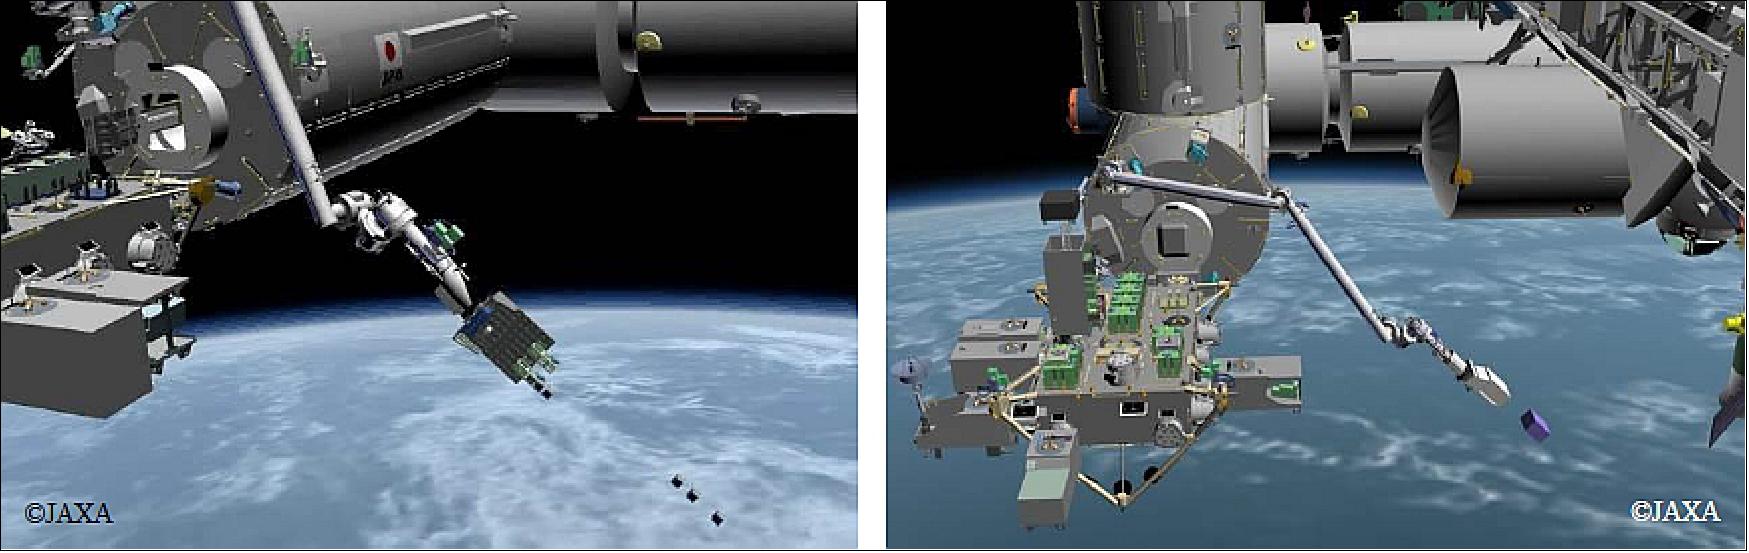 Figure 22: The deployment operation by using the J-SSOD. Left: deployment of CubeSats; Right: deployment of microsatellites (image credit: JAXA)